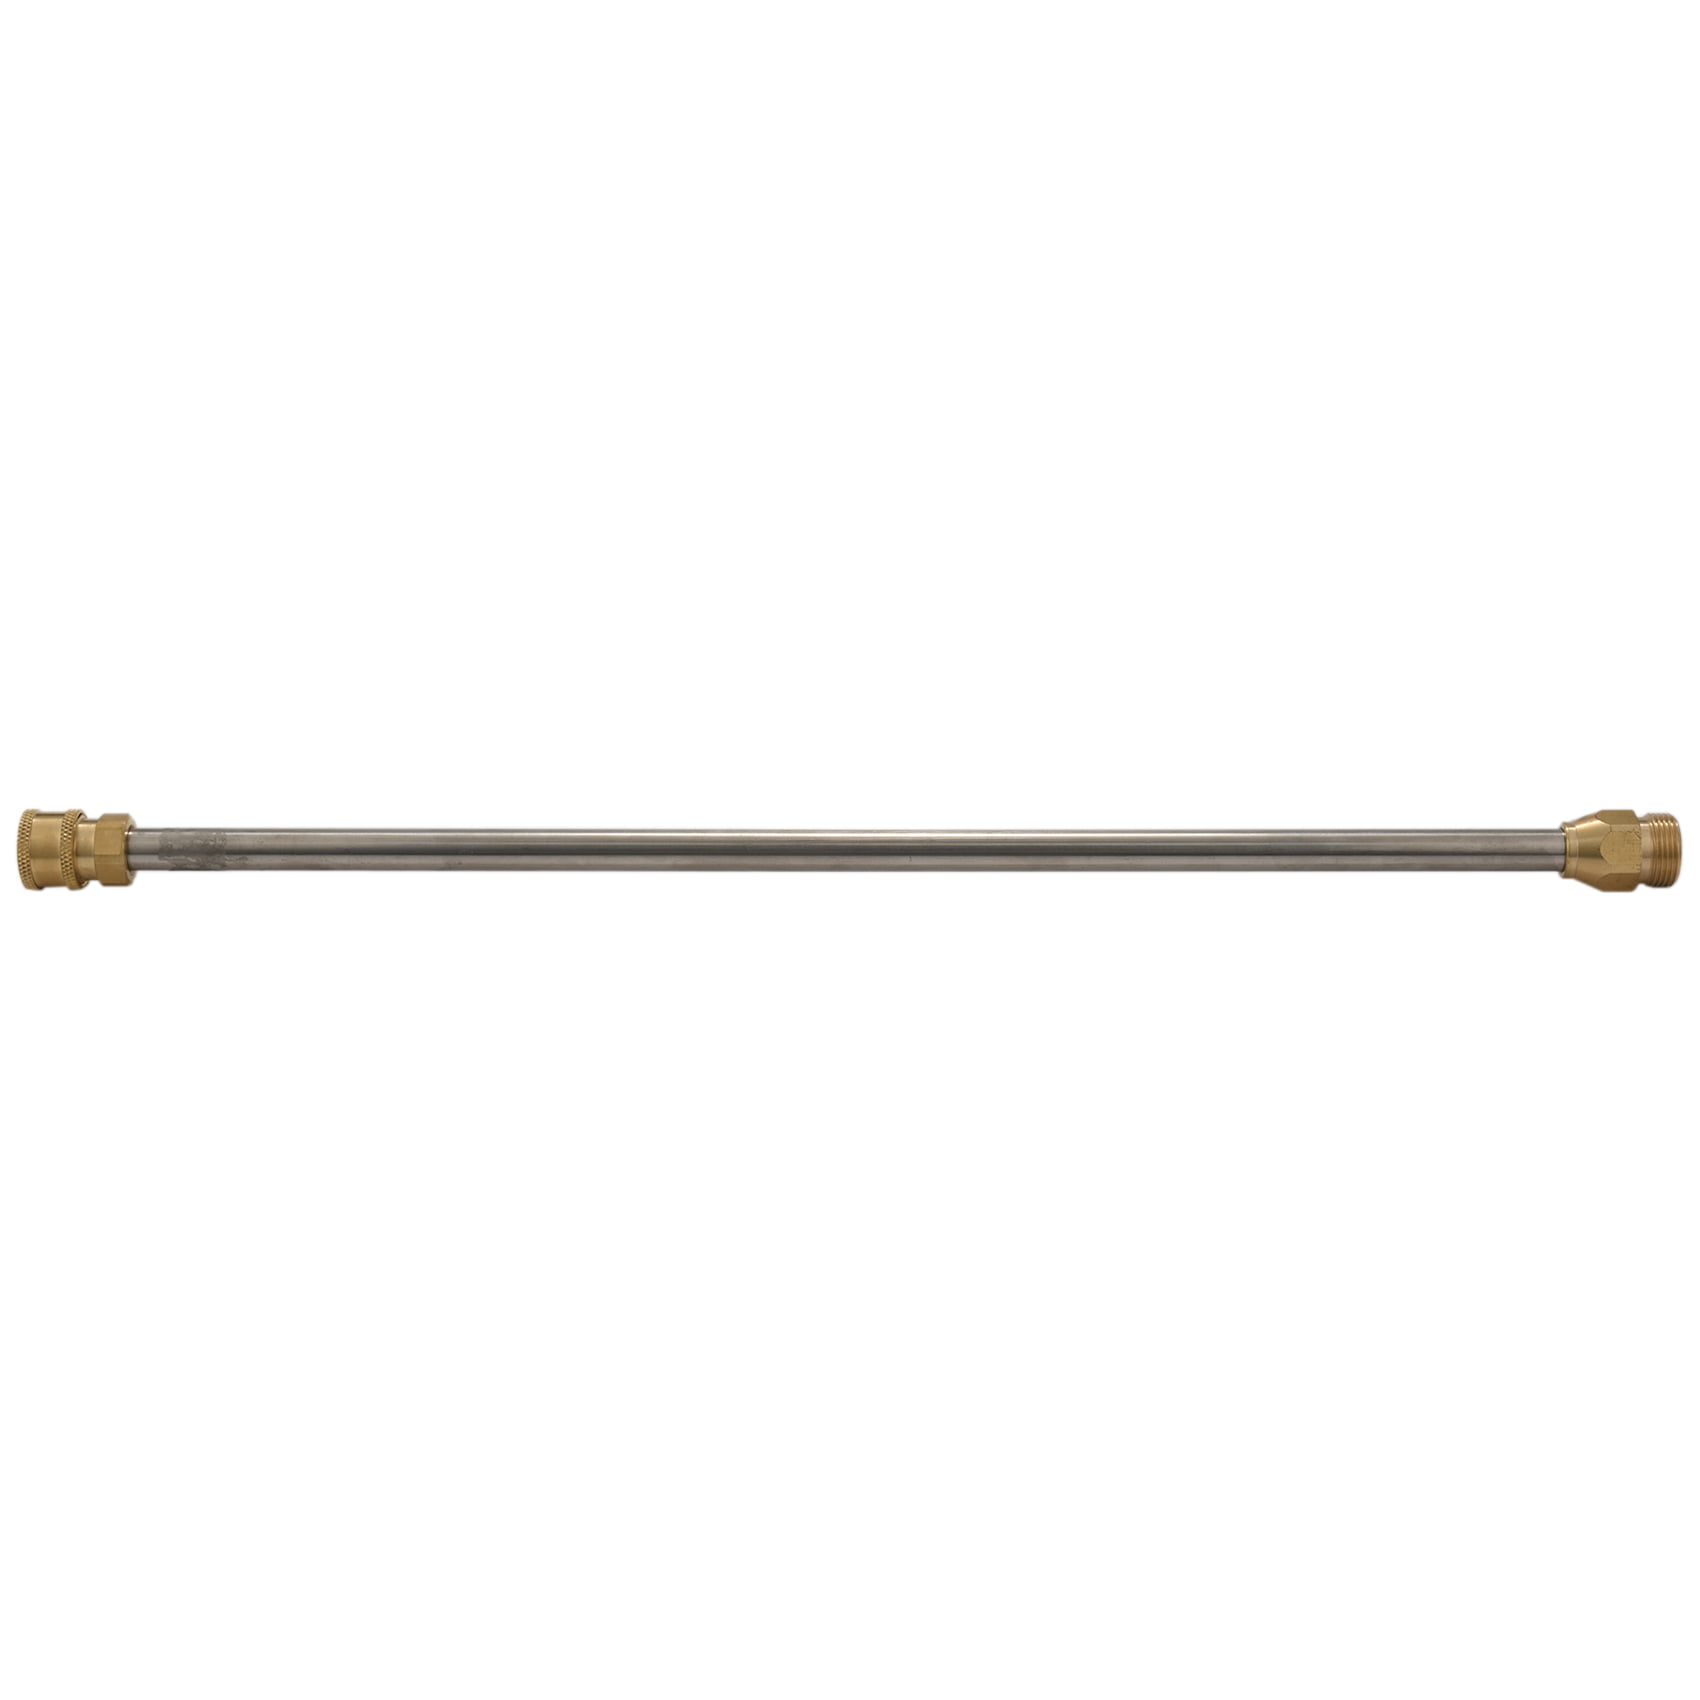 Up to 35/40/50CM Pressure Washer Replacement Spray Lance Extension 